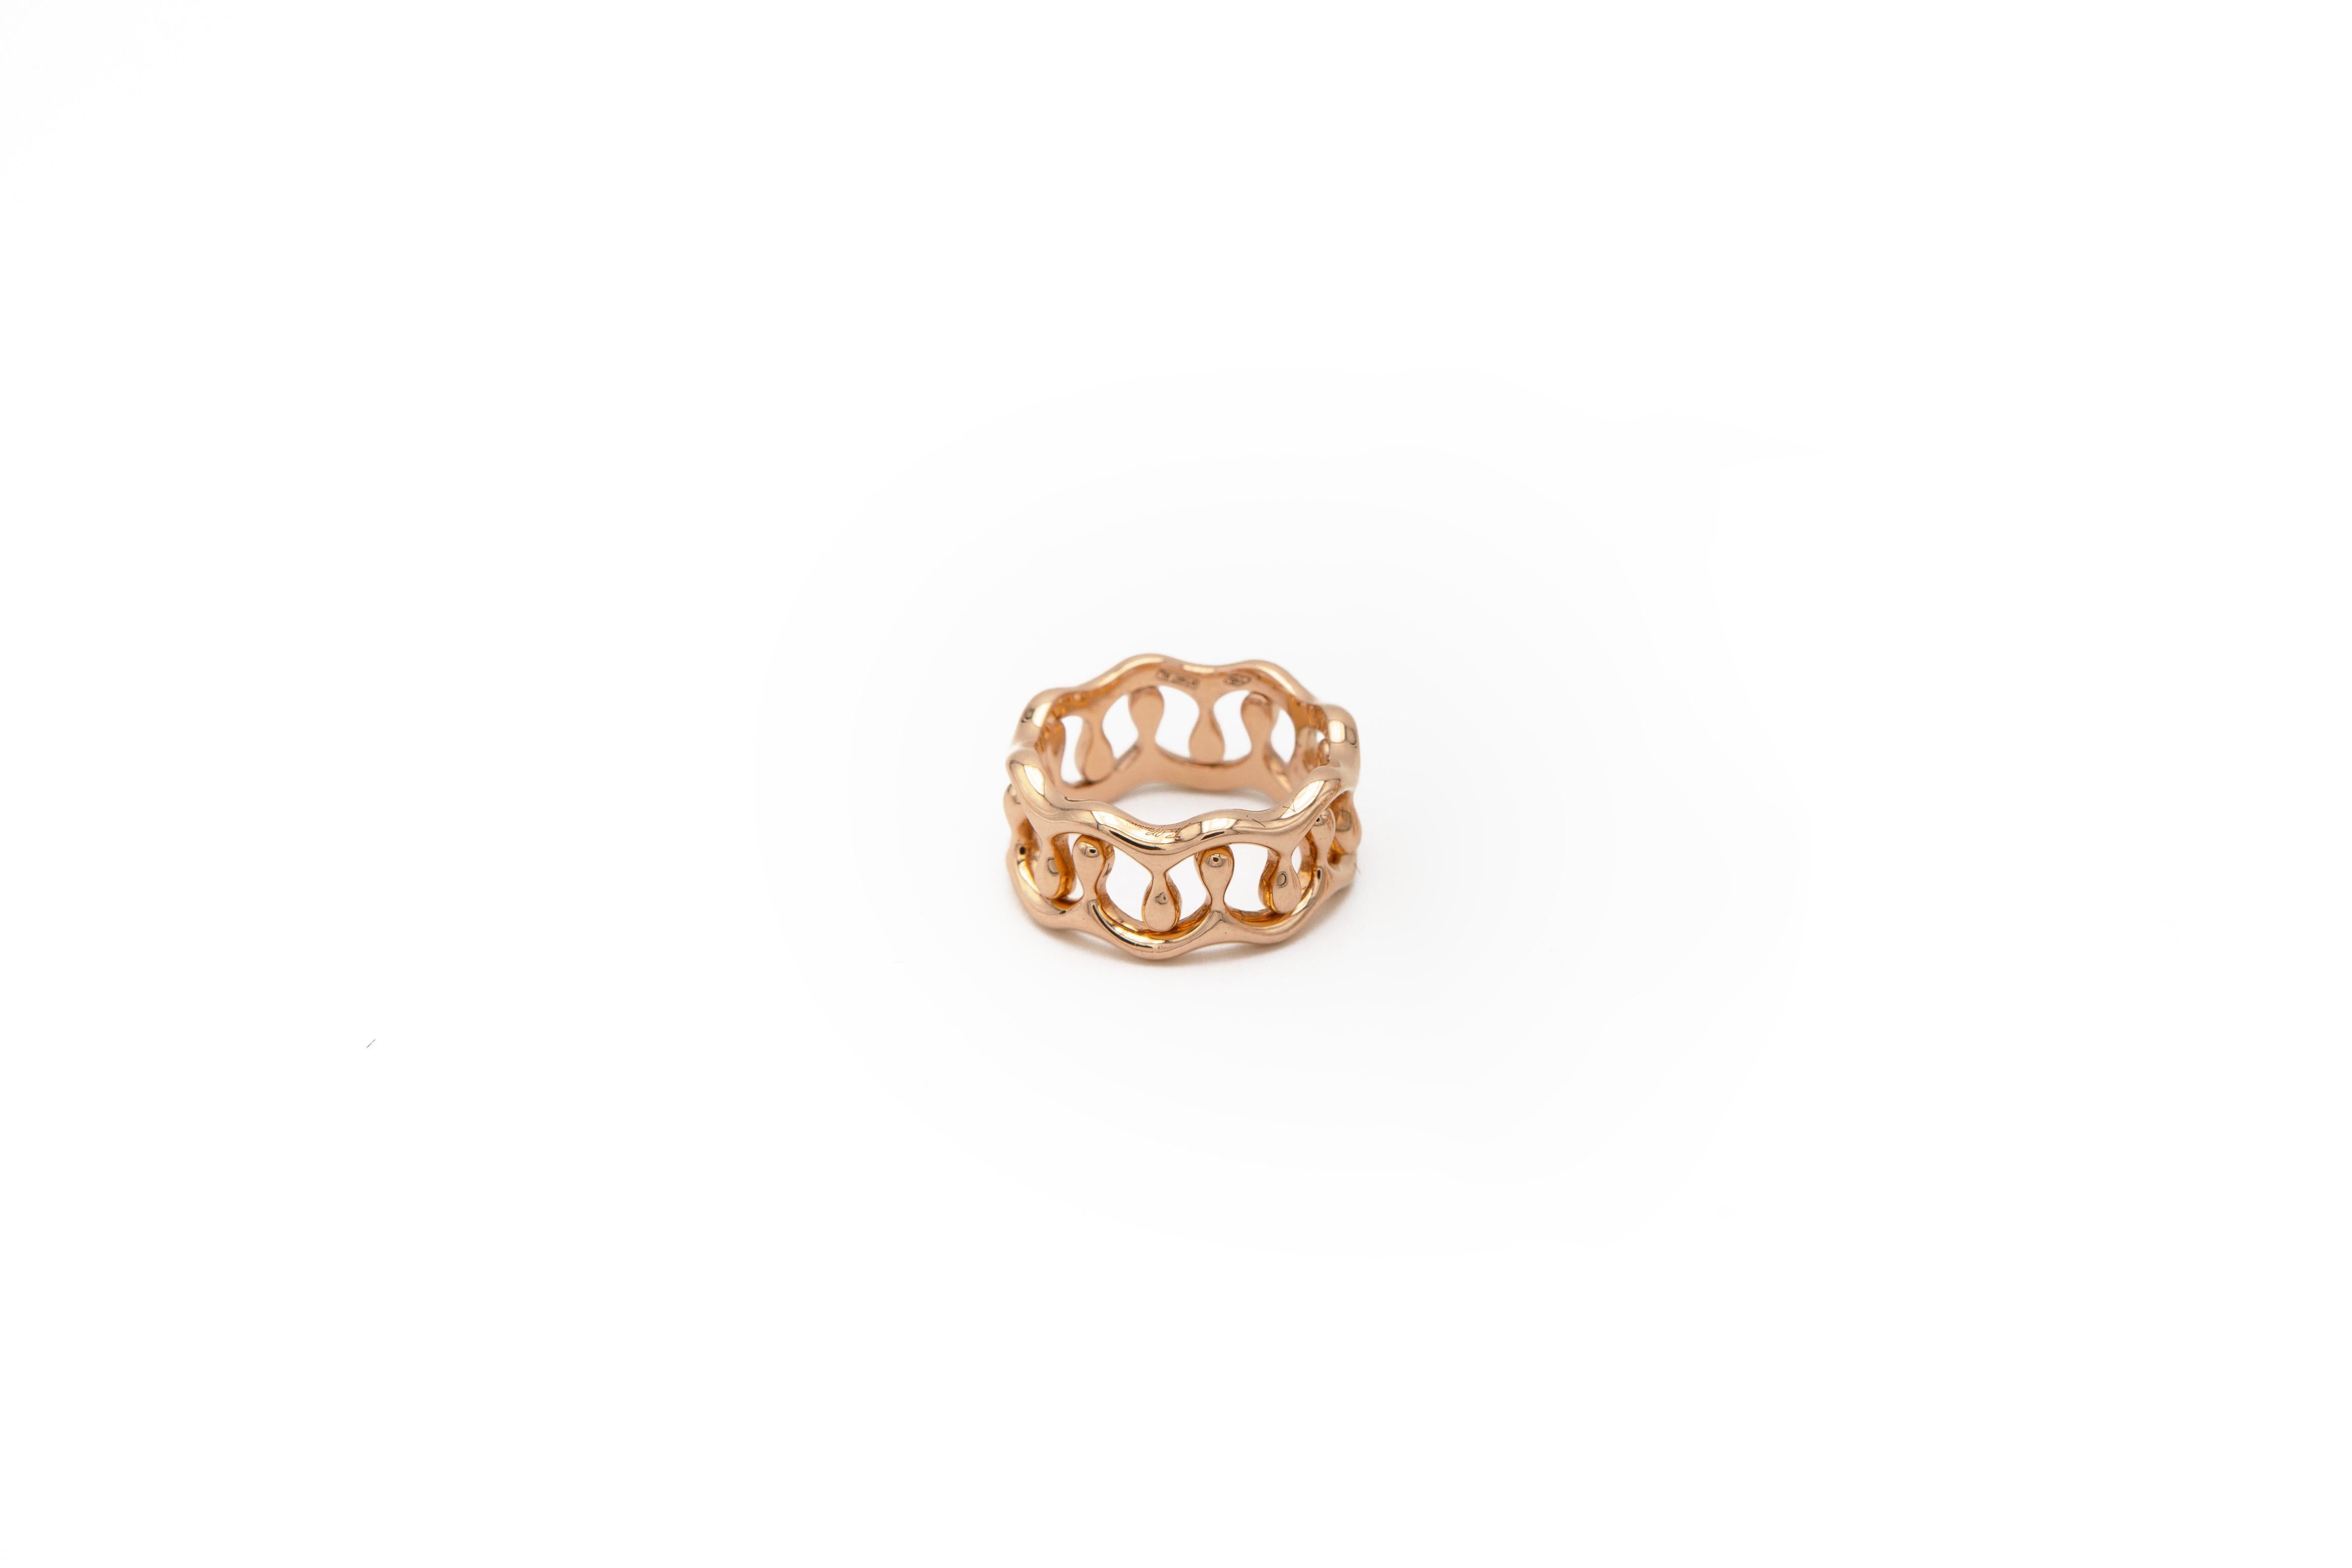 Alone or in pairs, or on different fingers,  it can be rearranged differently every day, to create a new ring and a new-found love every day.
It is a piece of jewellery that never grows old.
A playful ring made up of three crown-shaped rings that